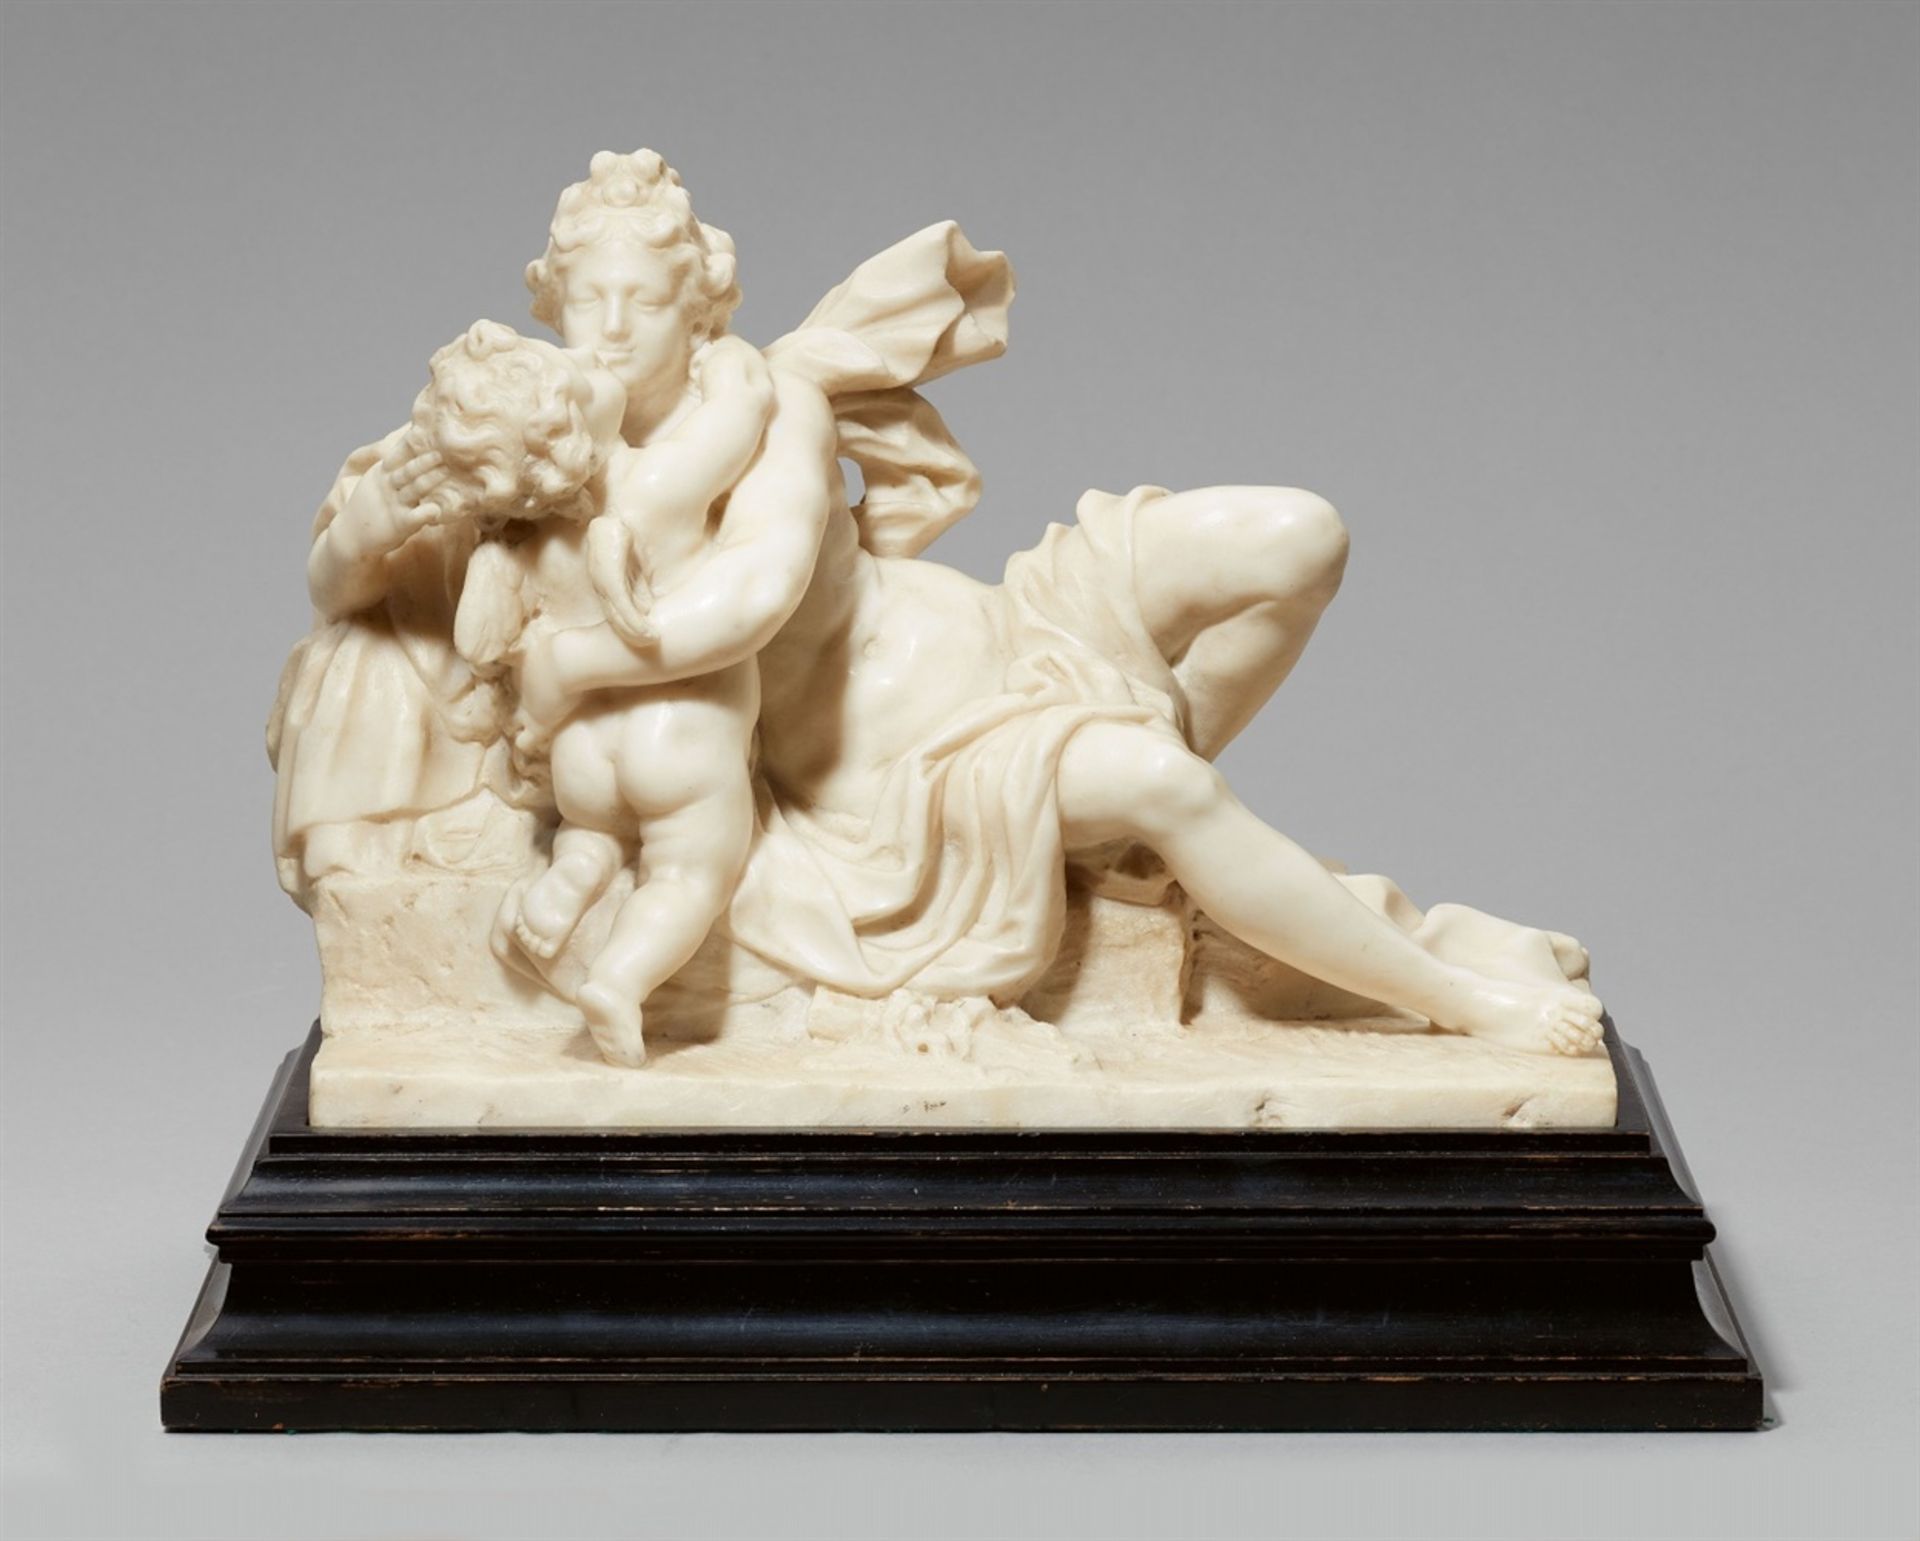 A white marble group of Venus and CupidOn an ebonised wood base. Venus is depicted with long flowing